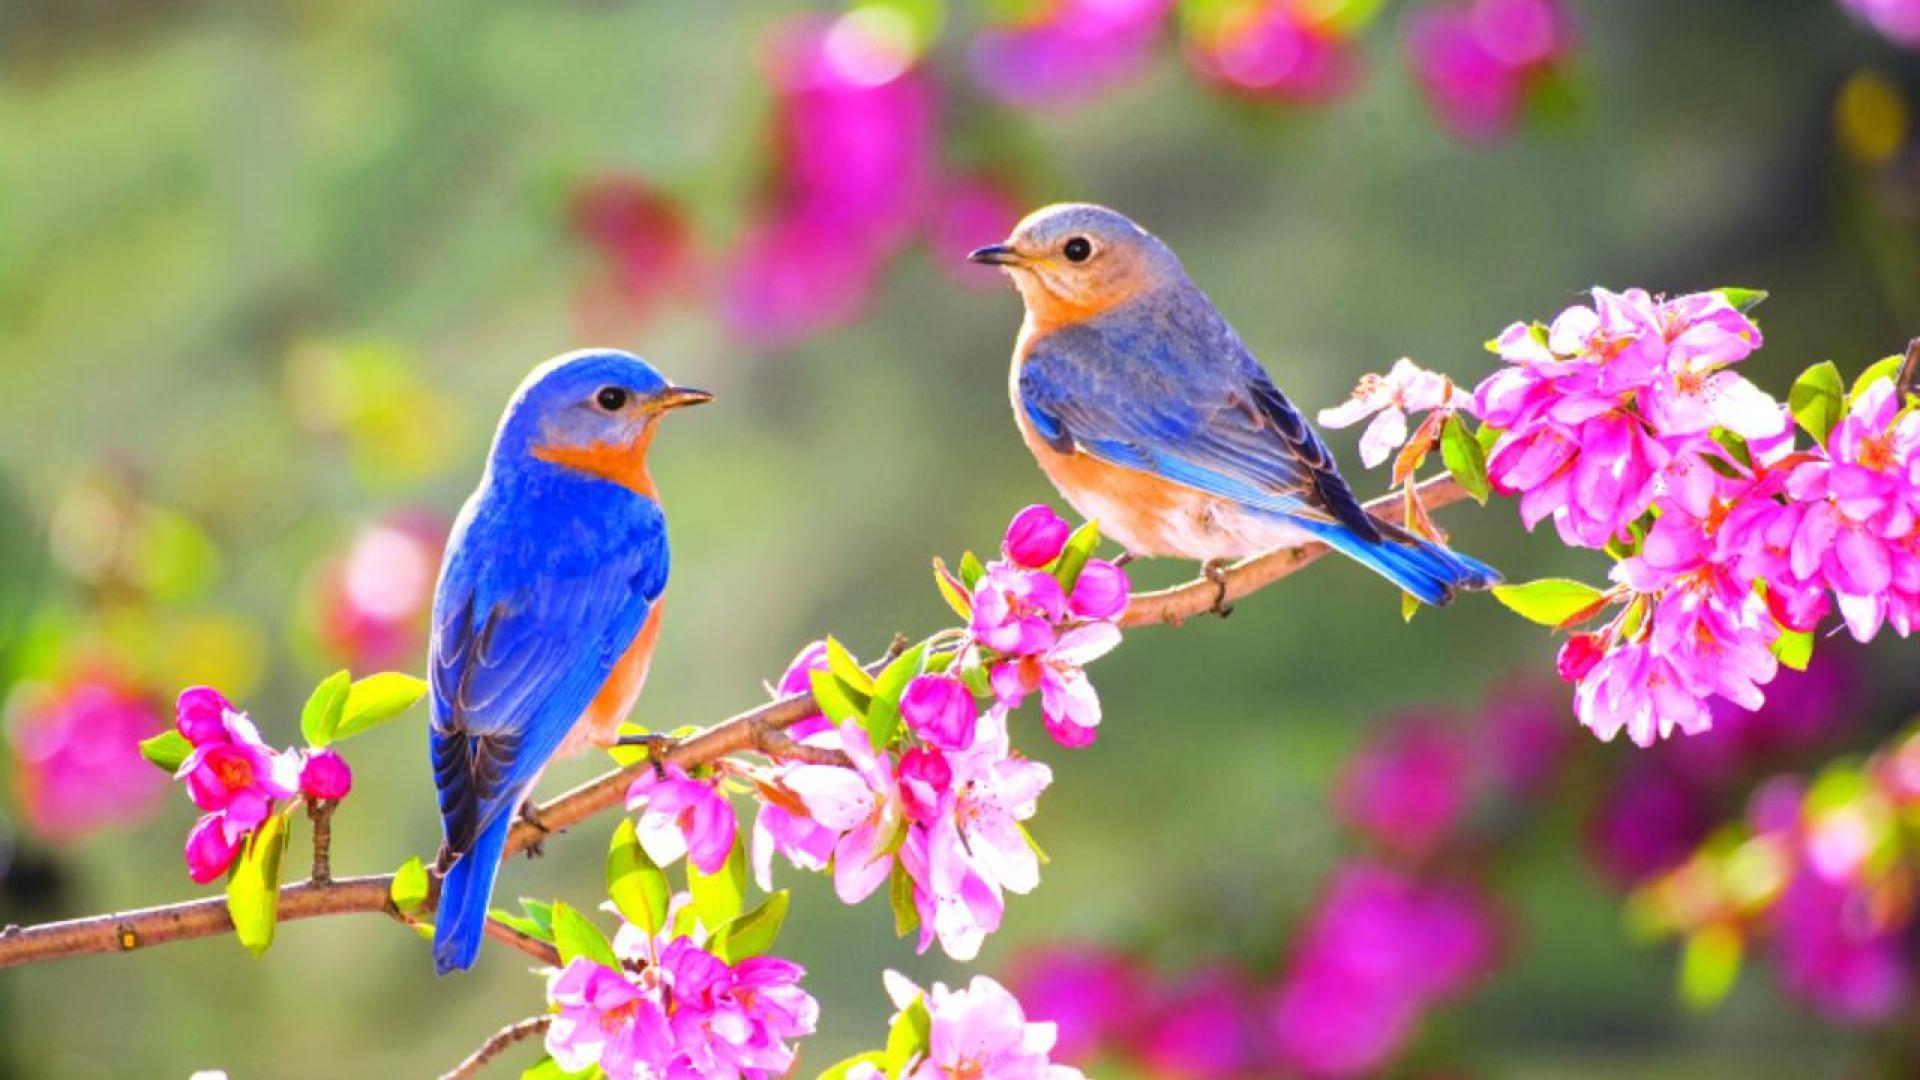 Wallpaper Birds and Flowers